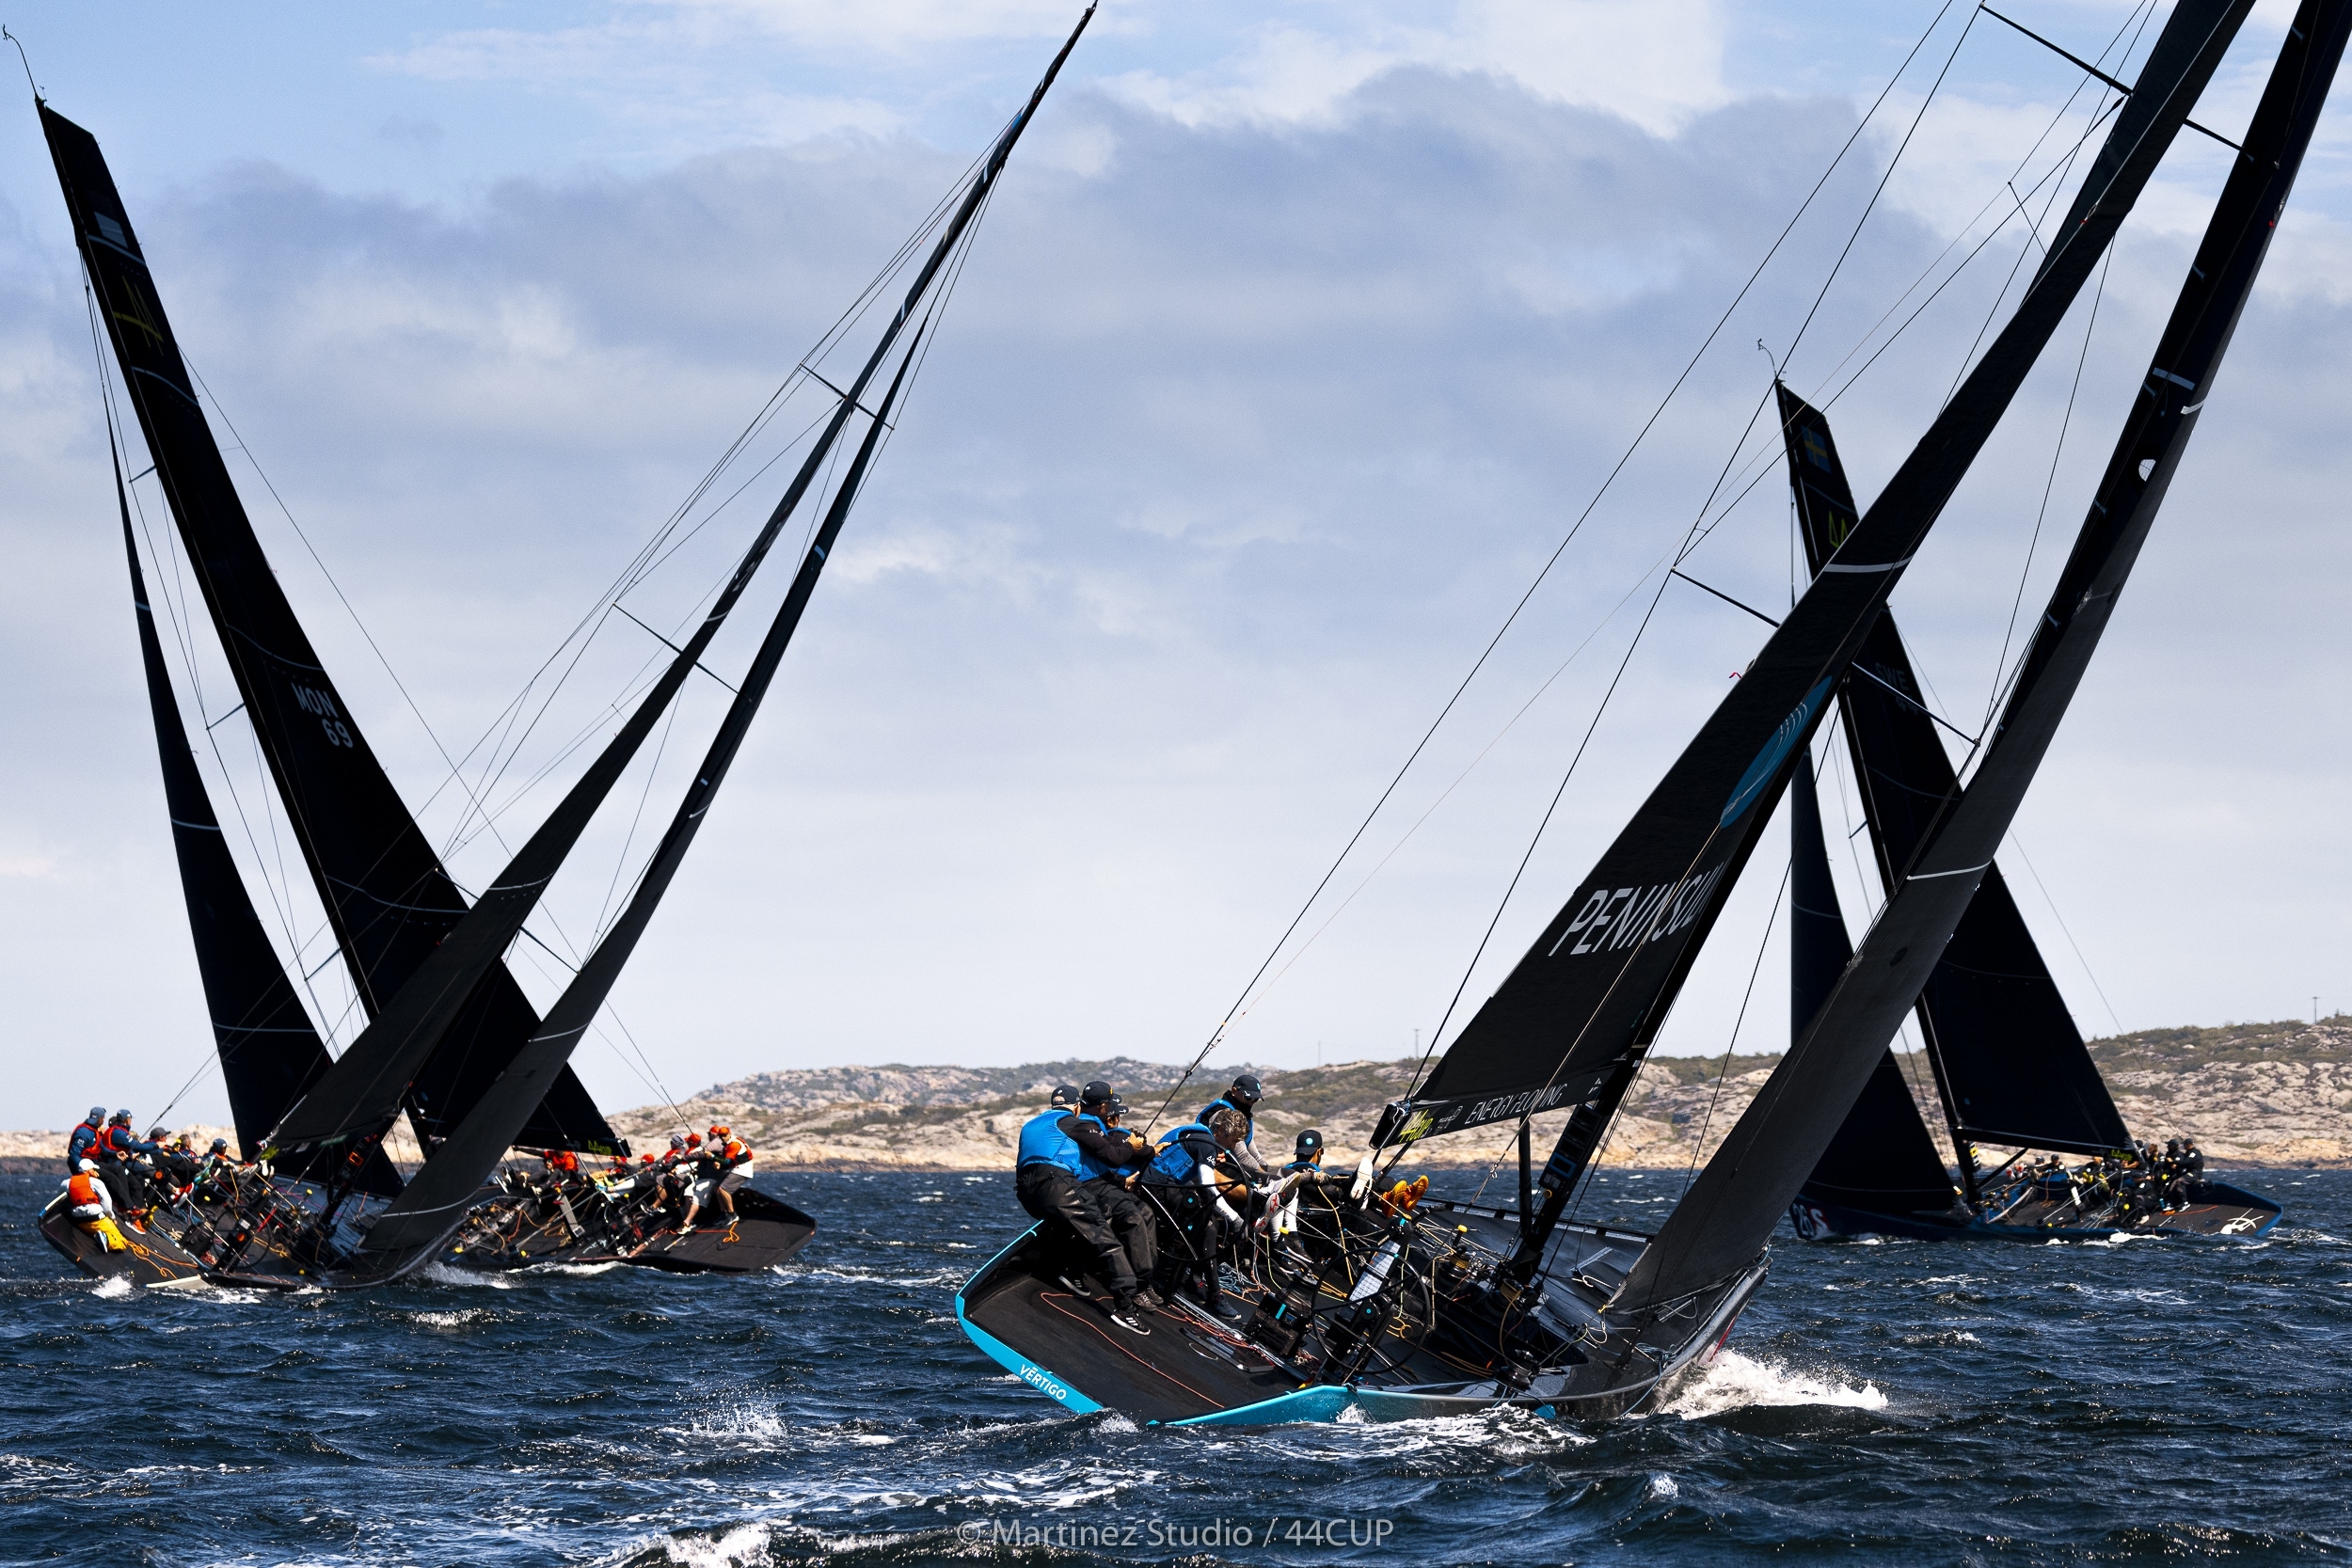  RC44  44Cup  Marstrand  Day 1